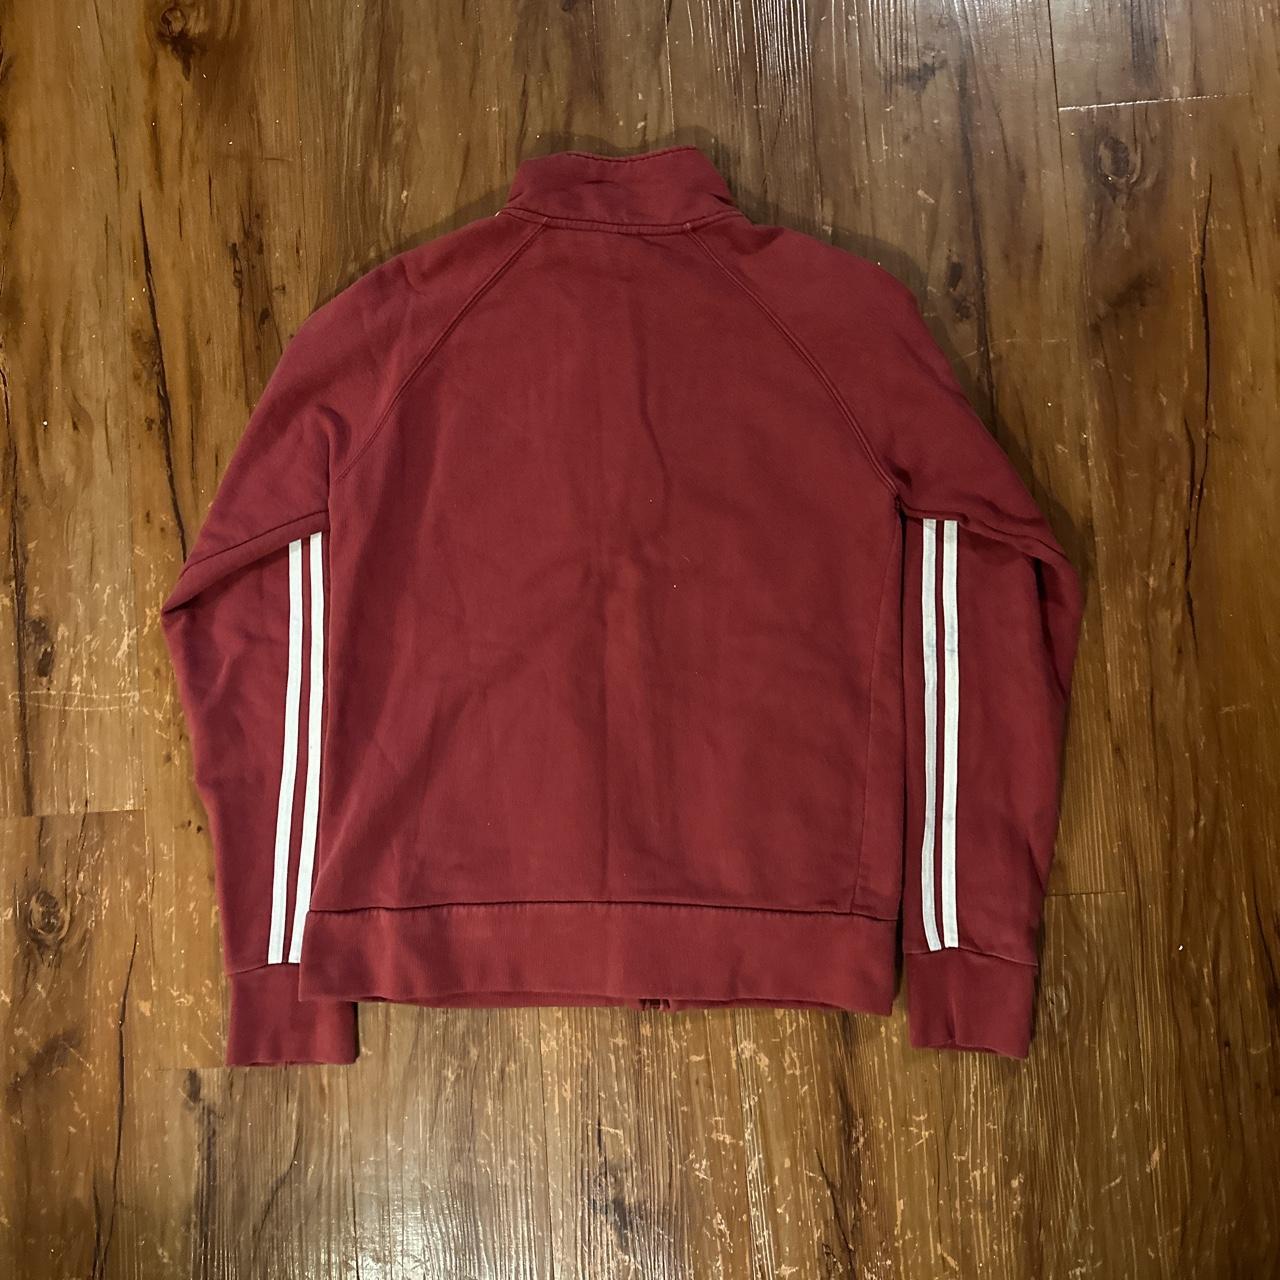 Just bought this CCCP jersey off depop. Anyone know what year it's